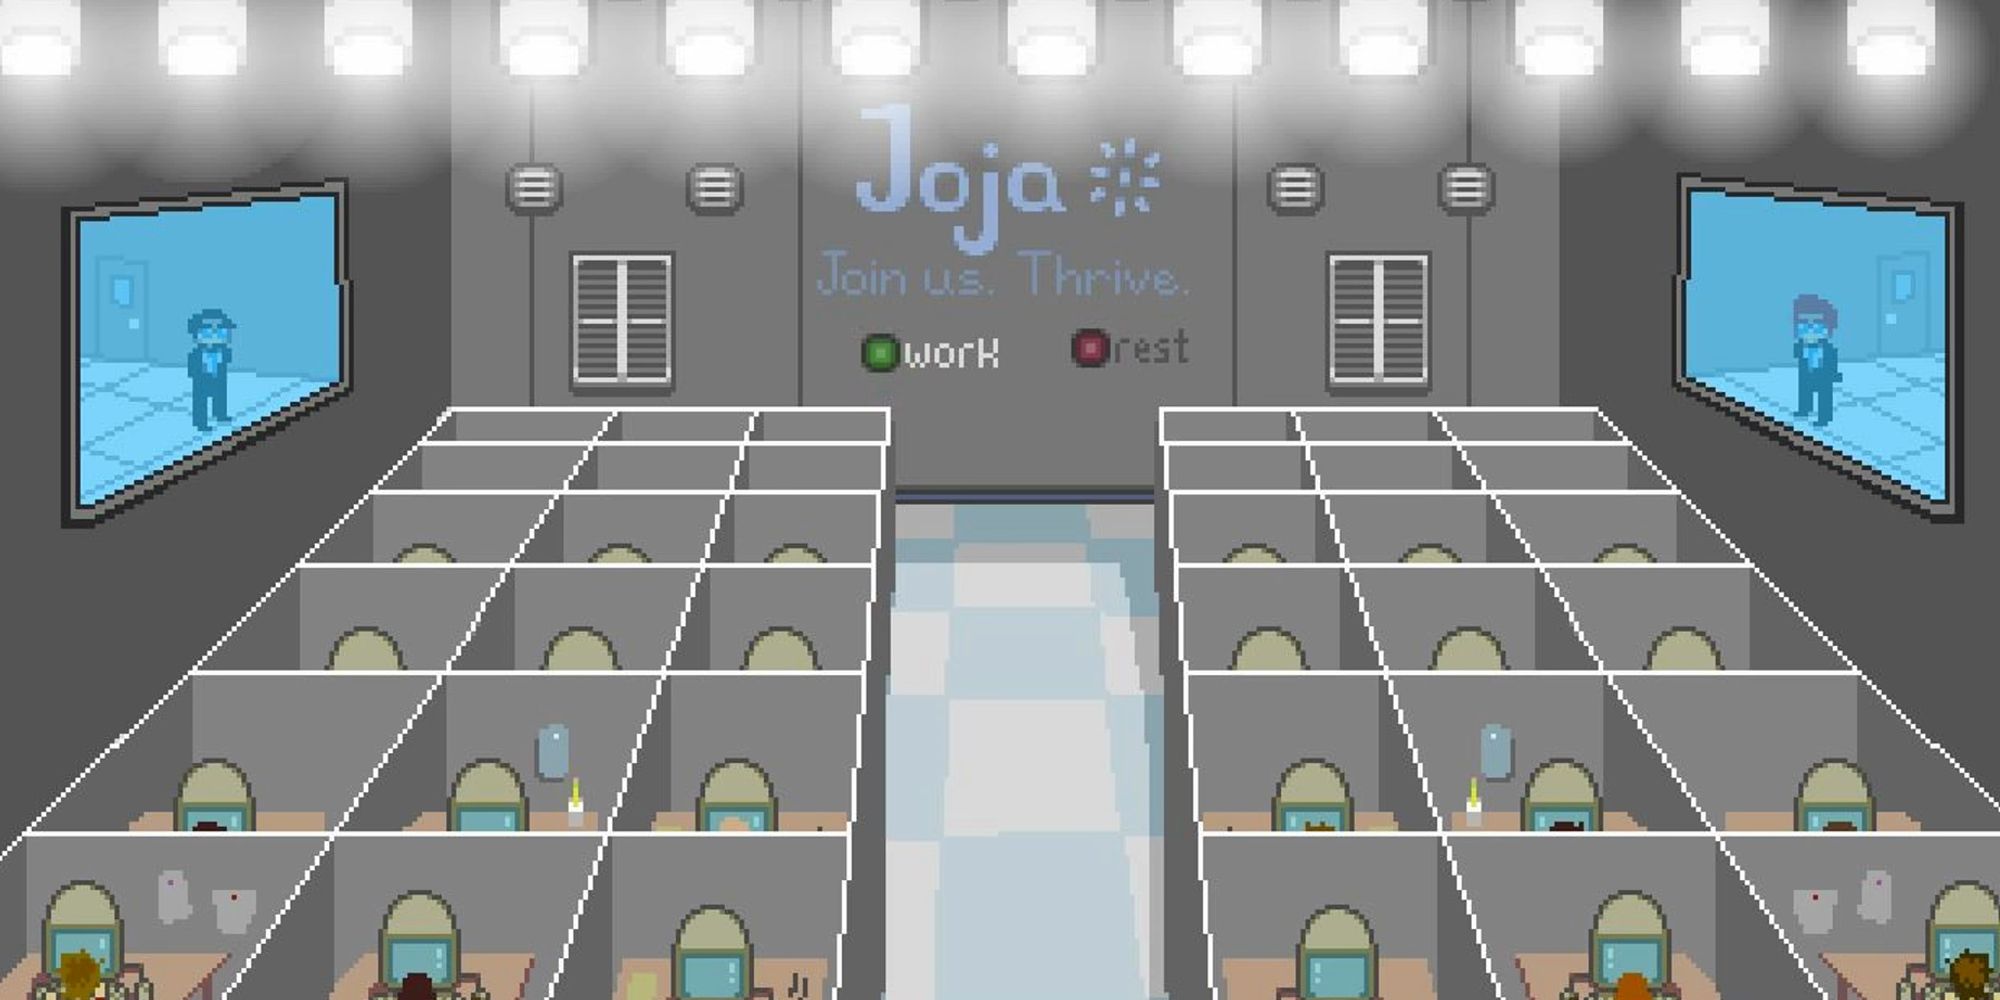 jojacorp room filled with cubicles